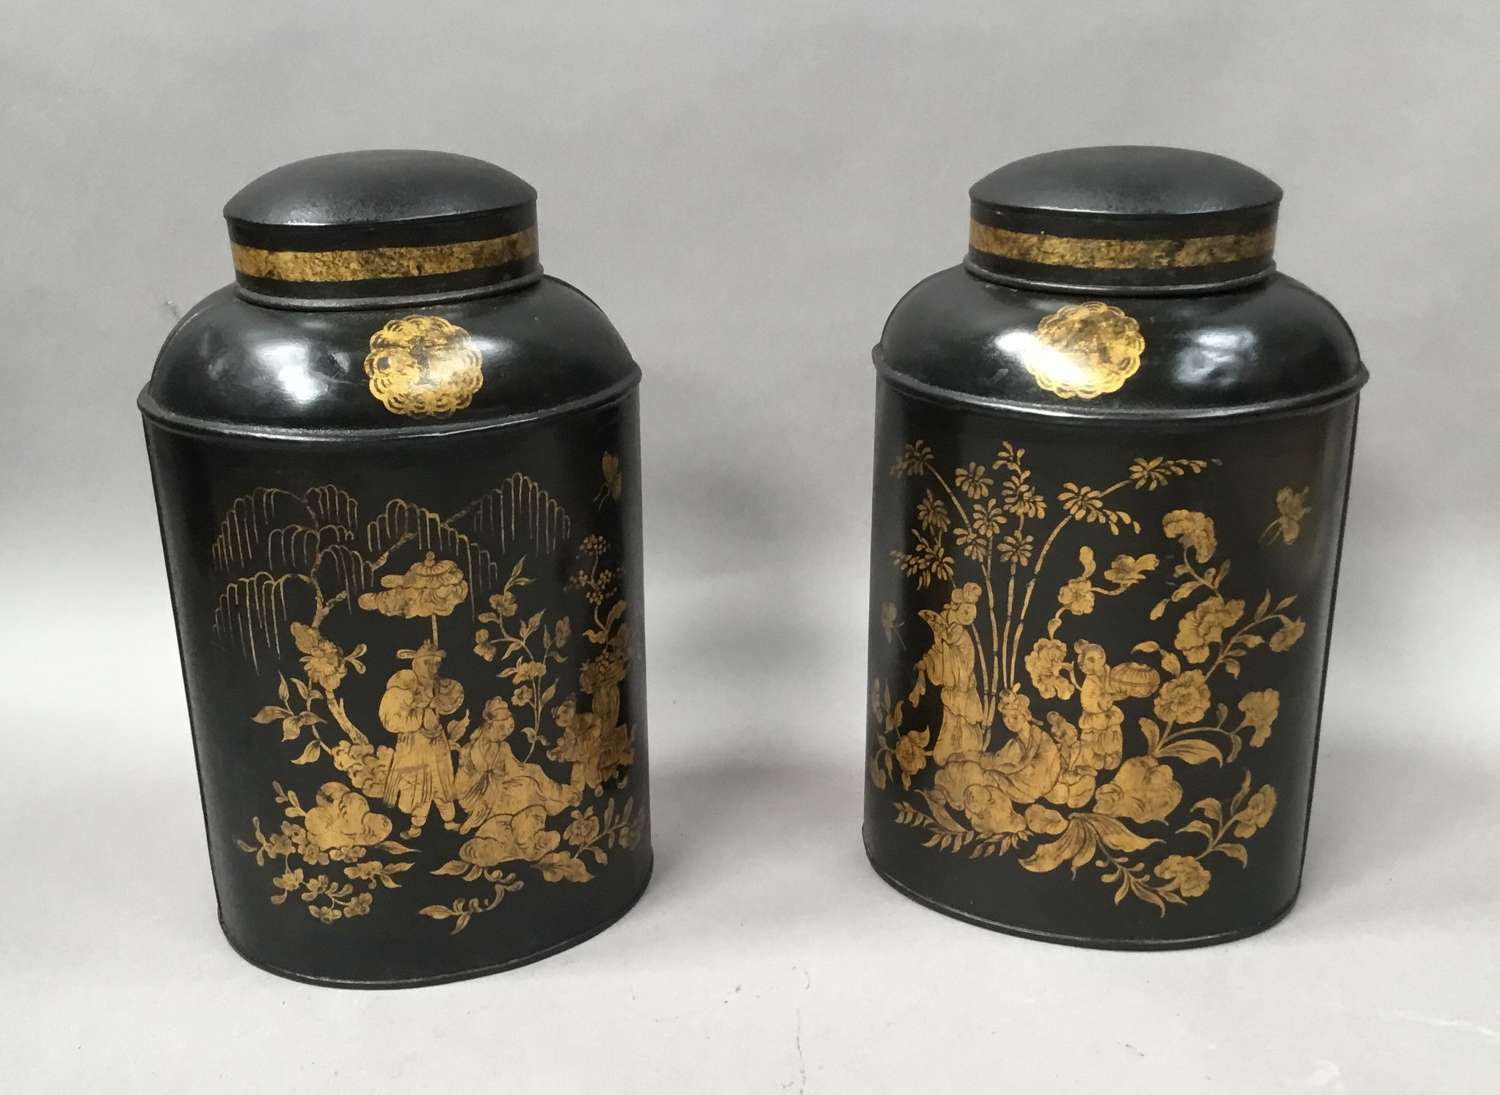 C19th pair of Chinoiserie lacquered tole tea canisters by John Bartlet